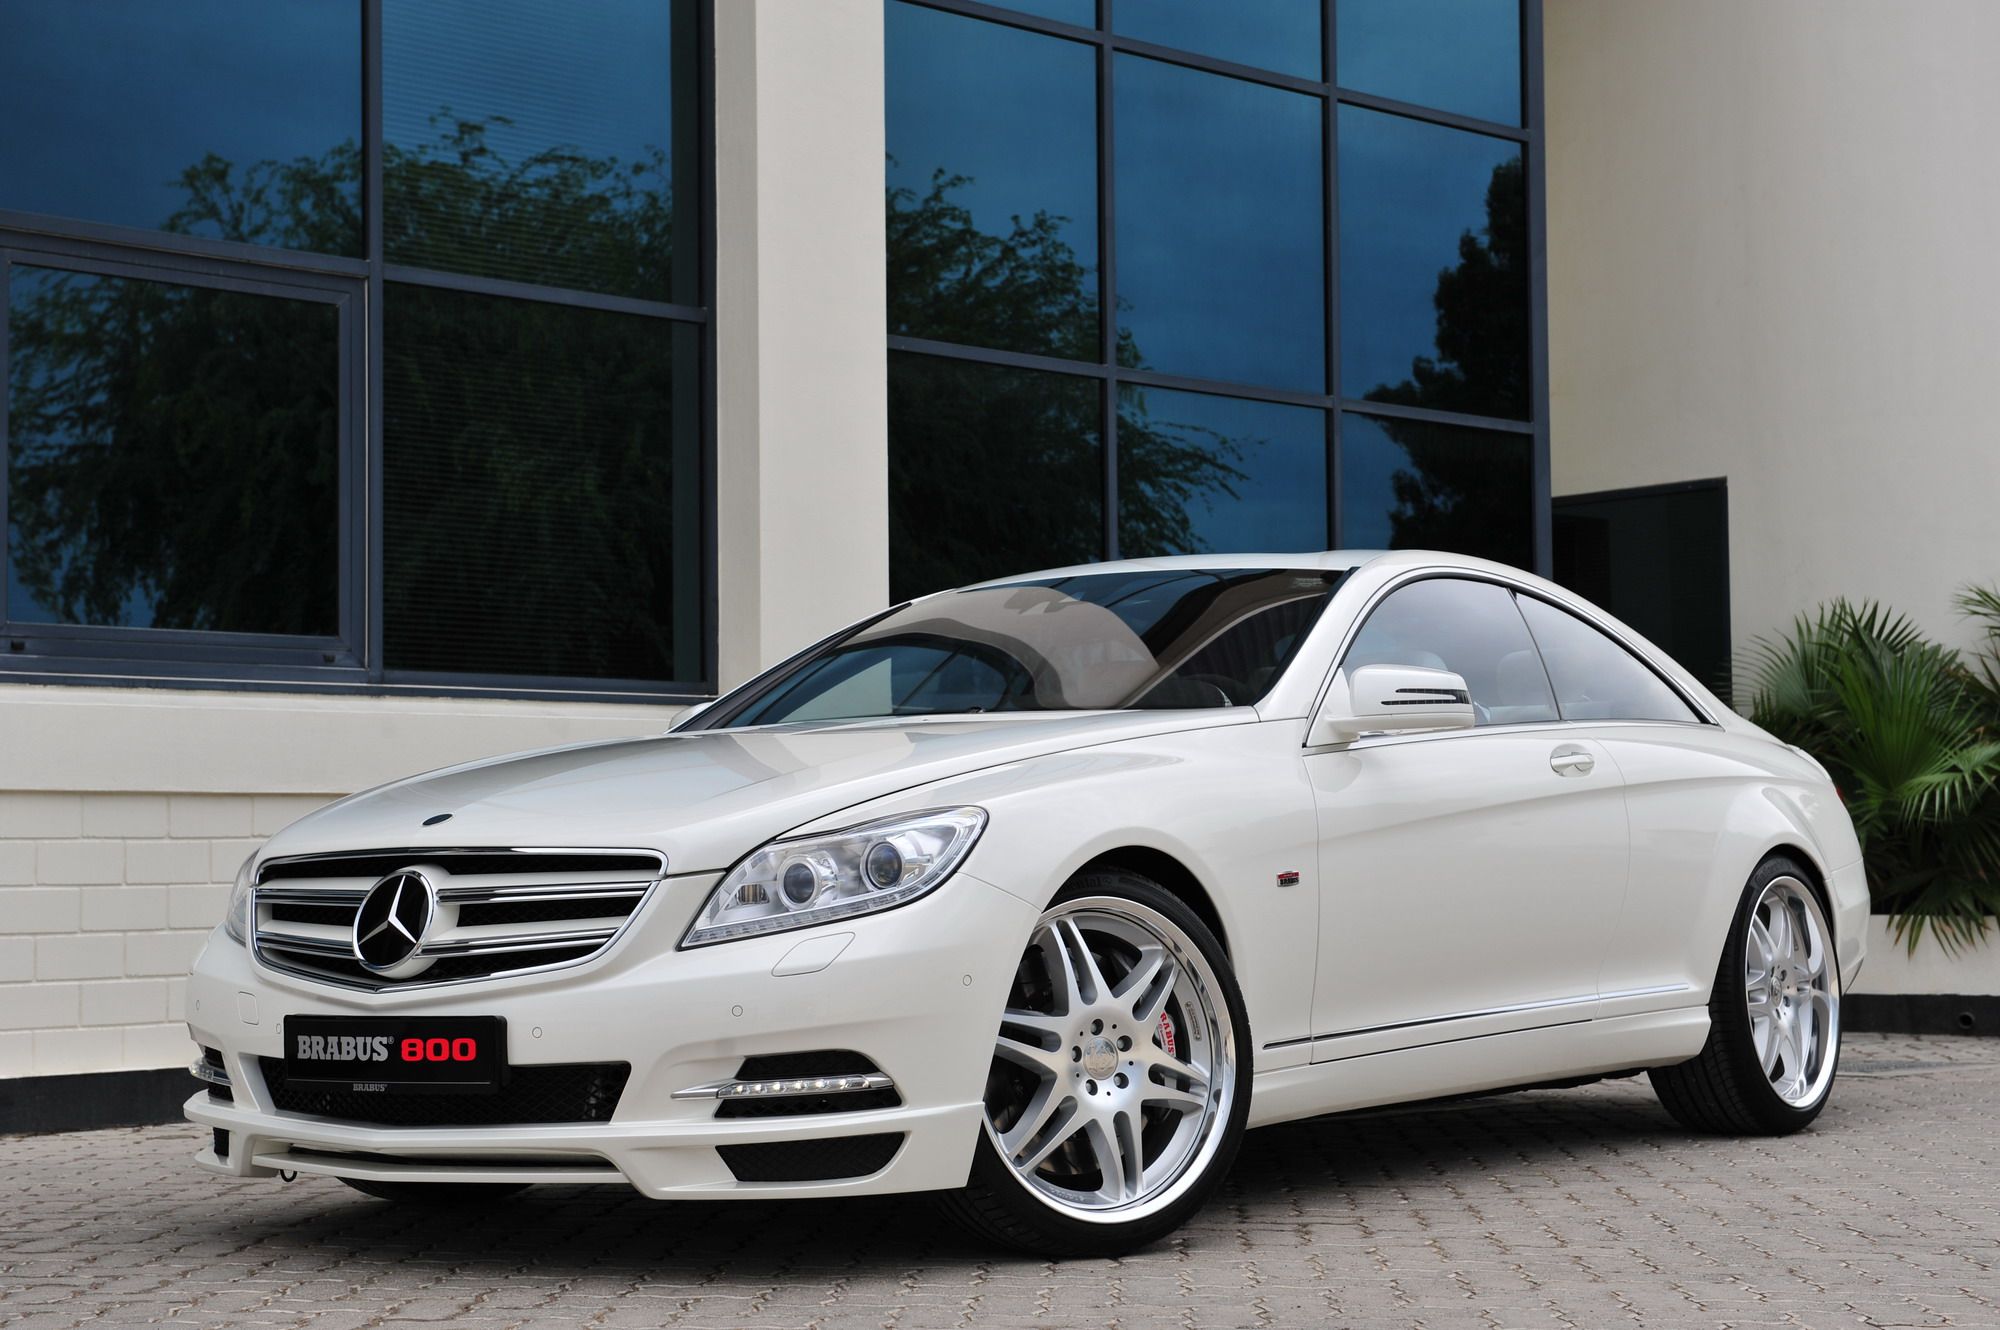 2012 Mercedes CL 800 Coupe by Brabus 